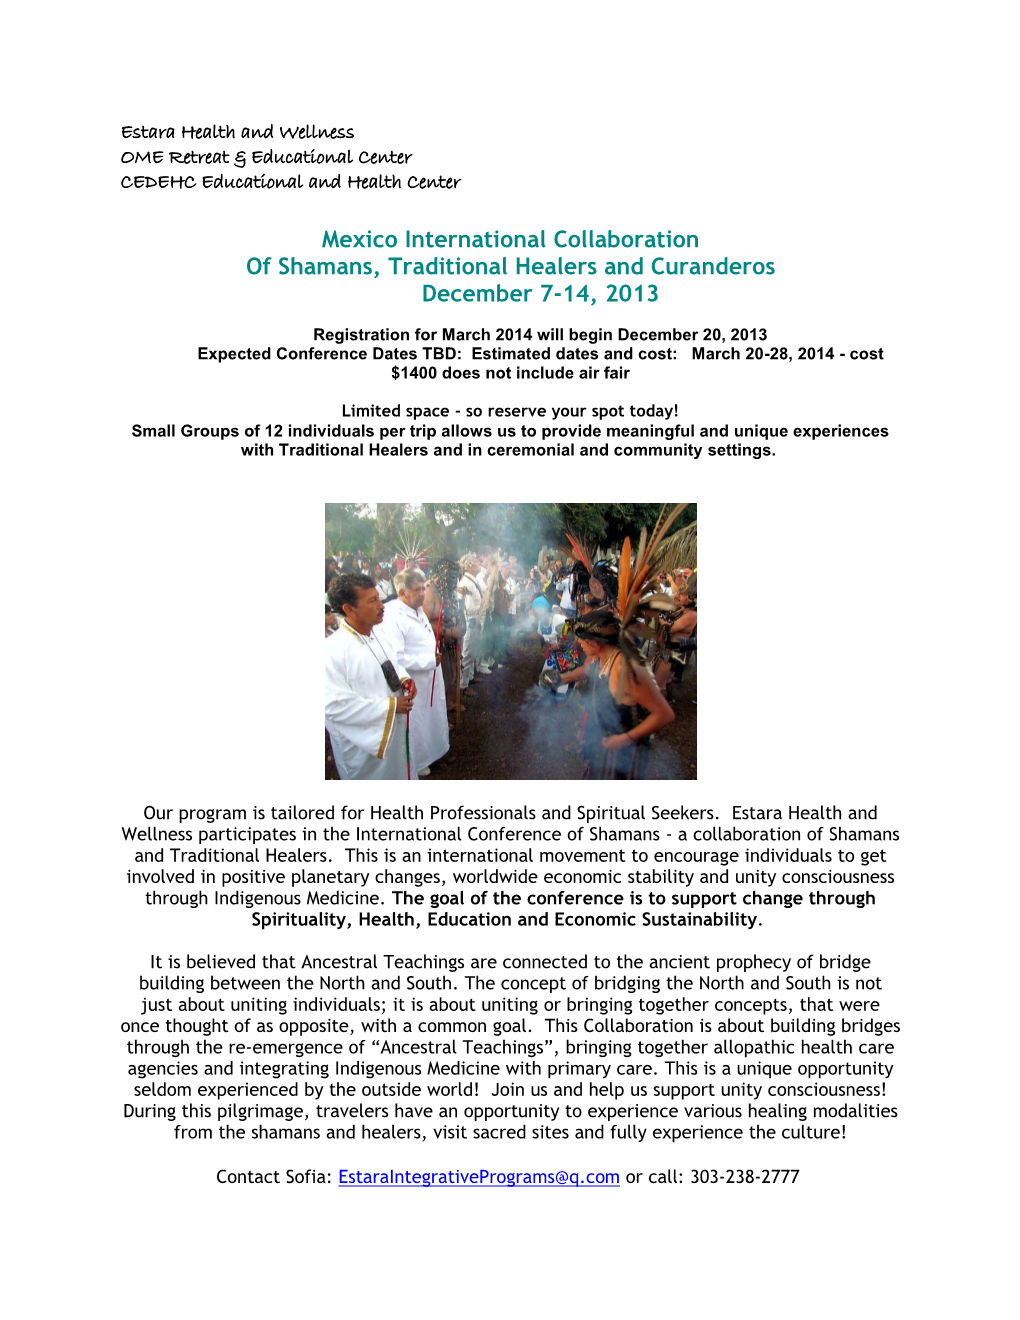 Mexico International Collaboration of Shamans, Traditional Healers and Curanderos December 7-14, 2013